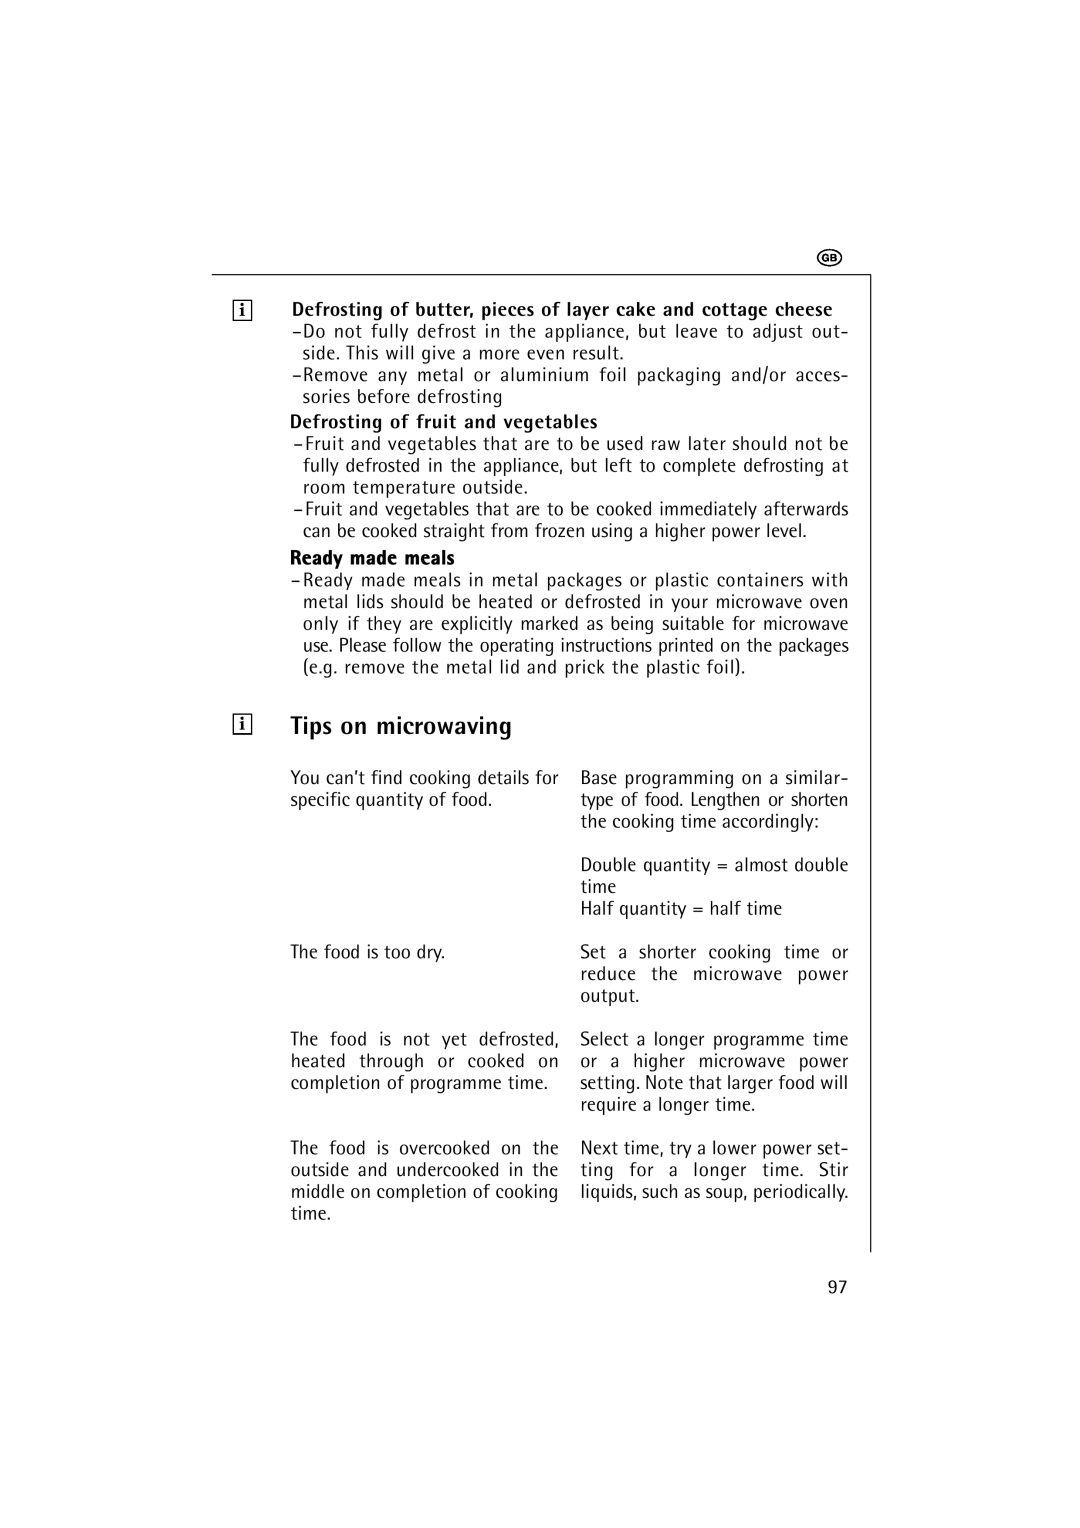 AEG 1231 E manual Tips on microwaving, Defrosting of fruit and vegetables, Ready made meals 